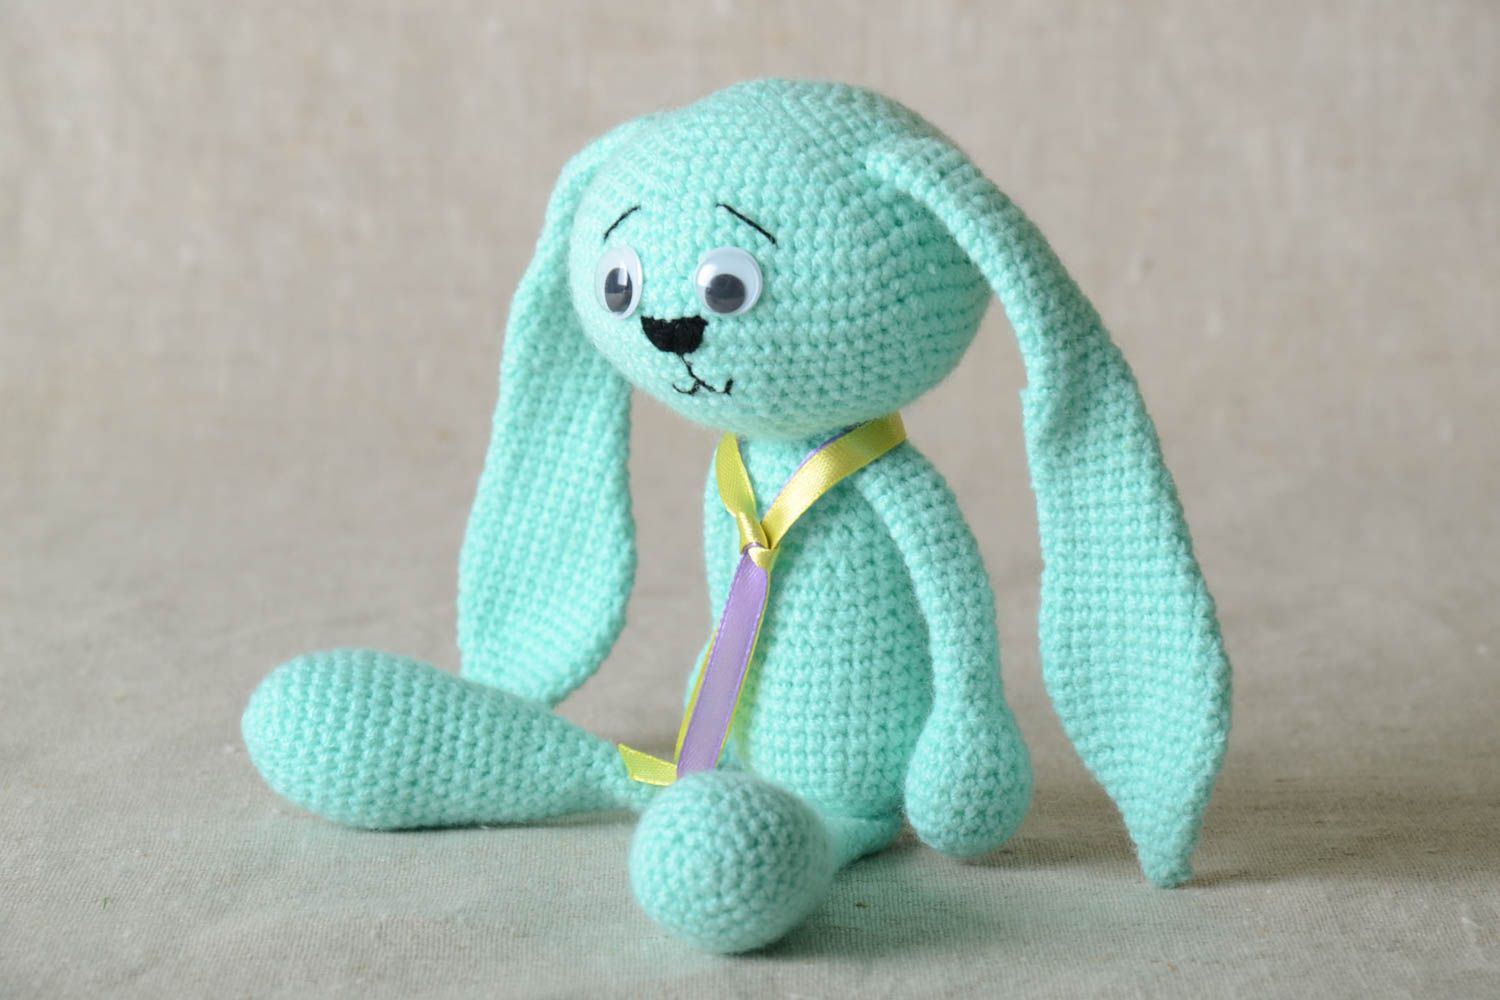 Beautiful handmade crochet soft toy stuffed toy best toys for kids gift ideas photo 1